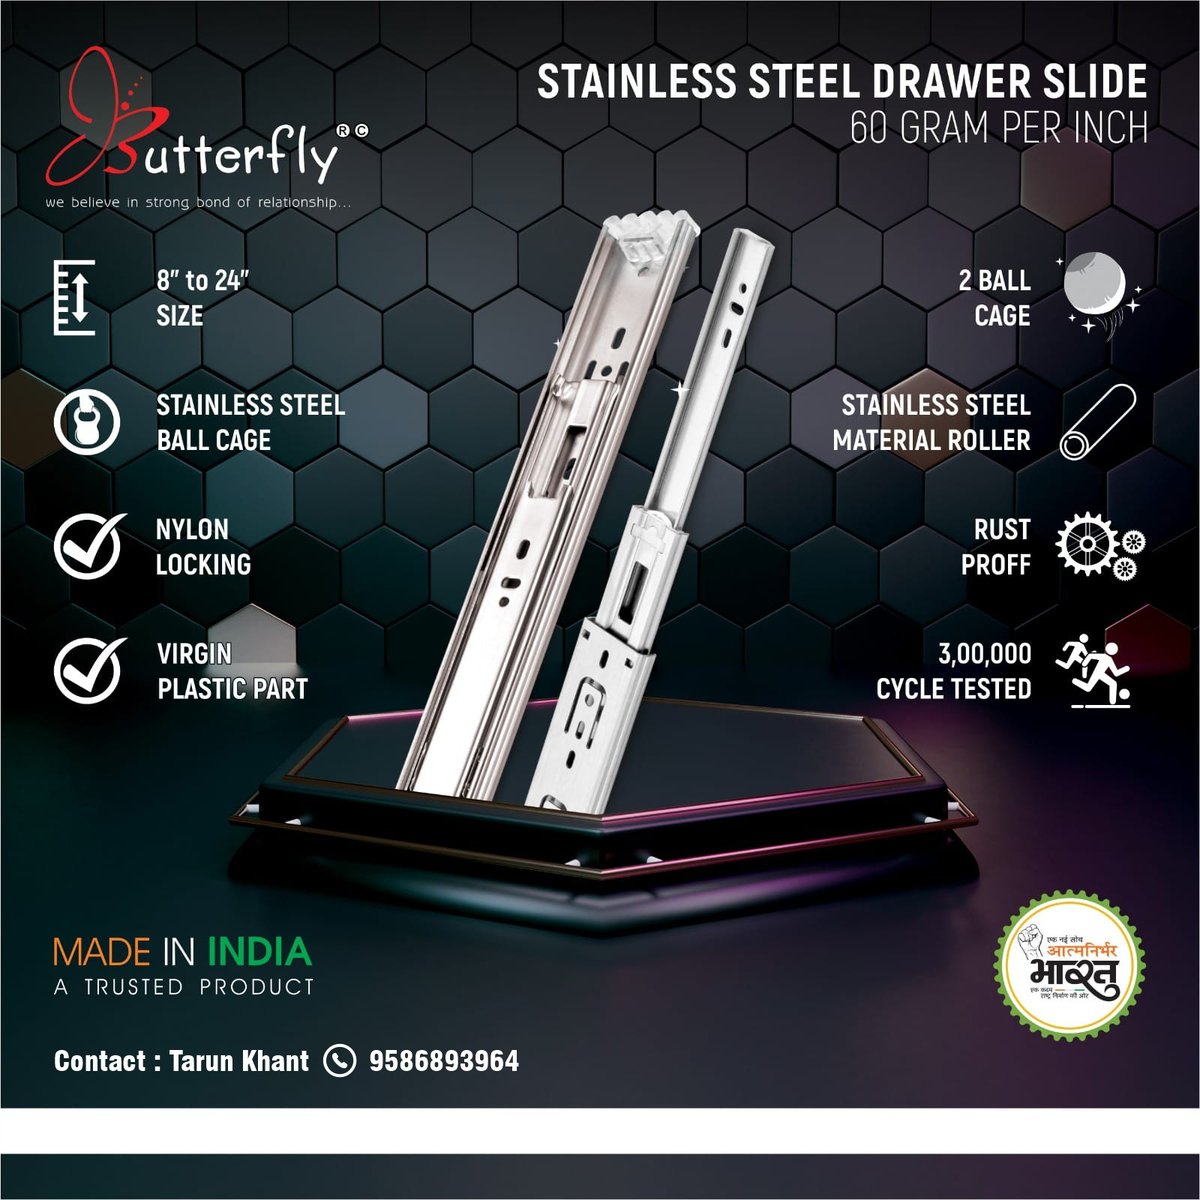 Experience effortless and smooth drawer movements with the Butterfly Stainless Steel Drawer Slide.
Contact: Mr. Tarun Khant - 9586893964
#butterflydrawerslide #StainlessSteelDrawerSlide #DrawerSlides #TelescopicSlides #StainlessSteelDrawerRunners #ButterflyStainlessSteelSlides